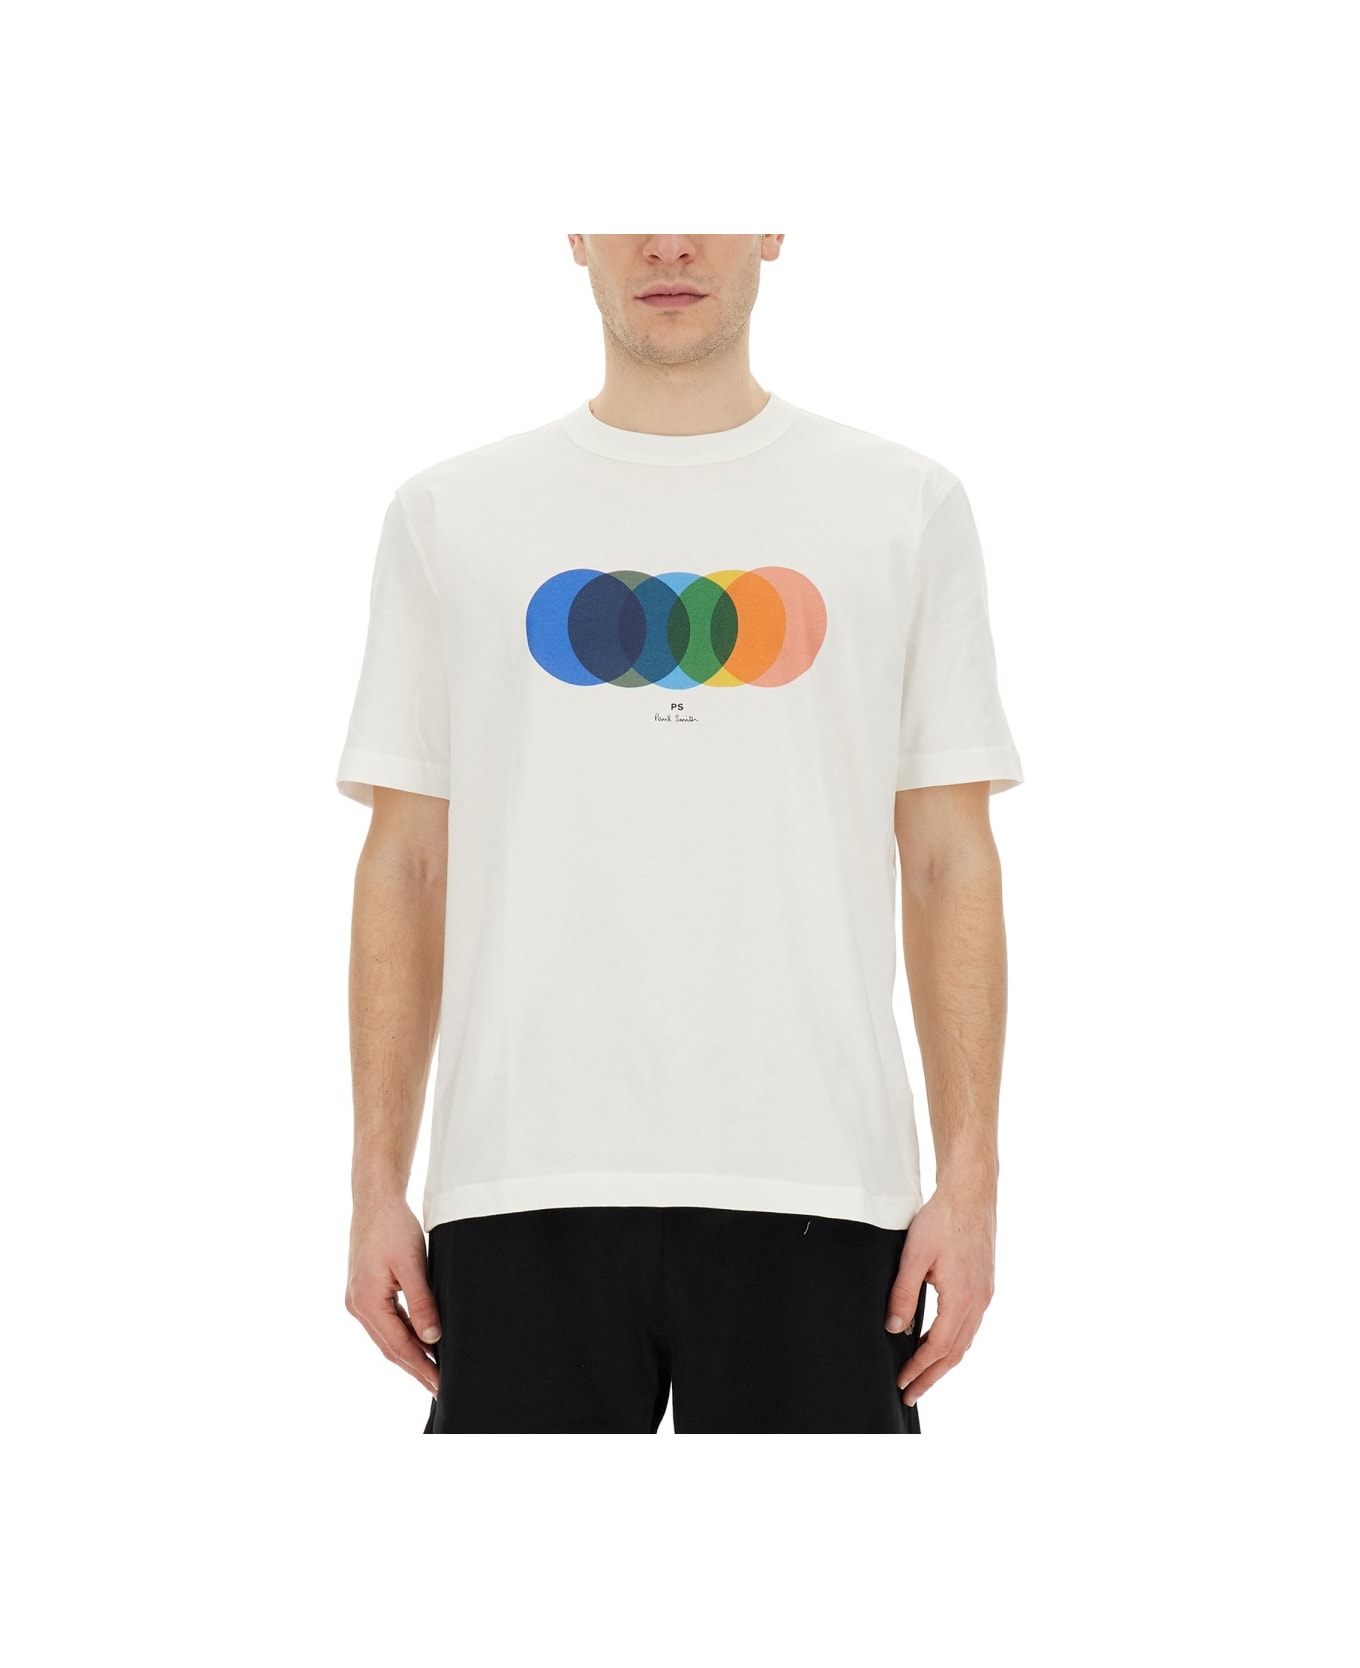 PS by Paul Smith "circles" T-shirt - WHITE シャツ